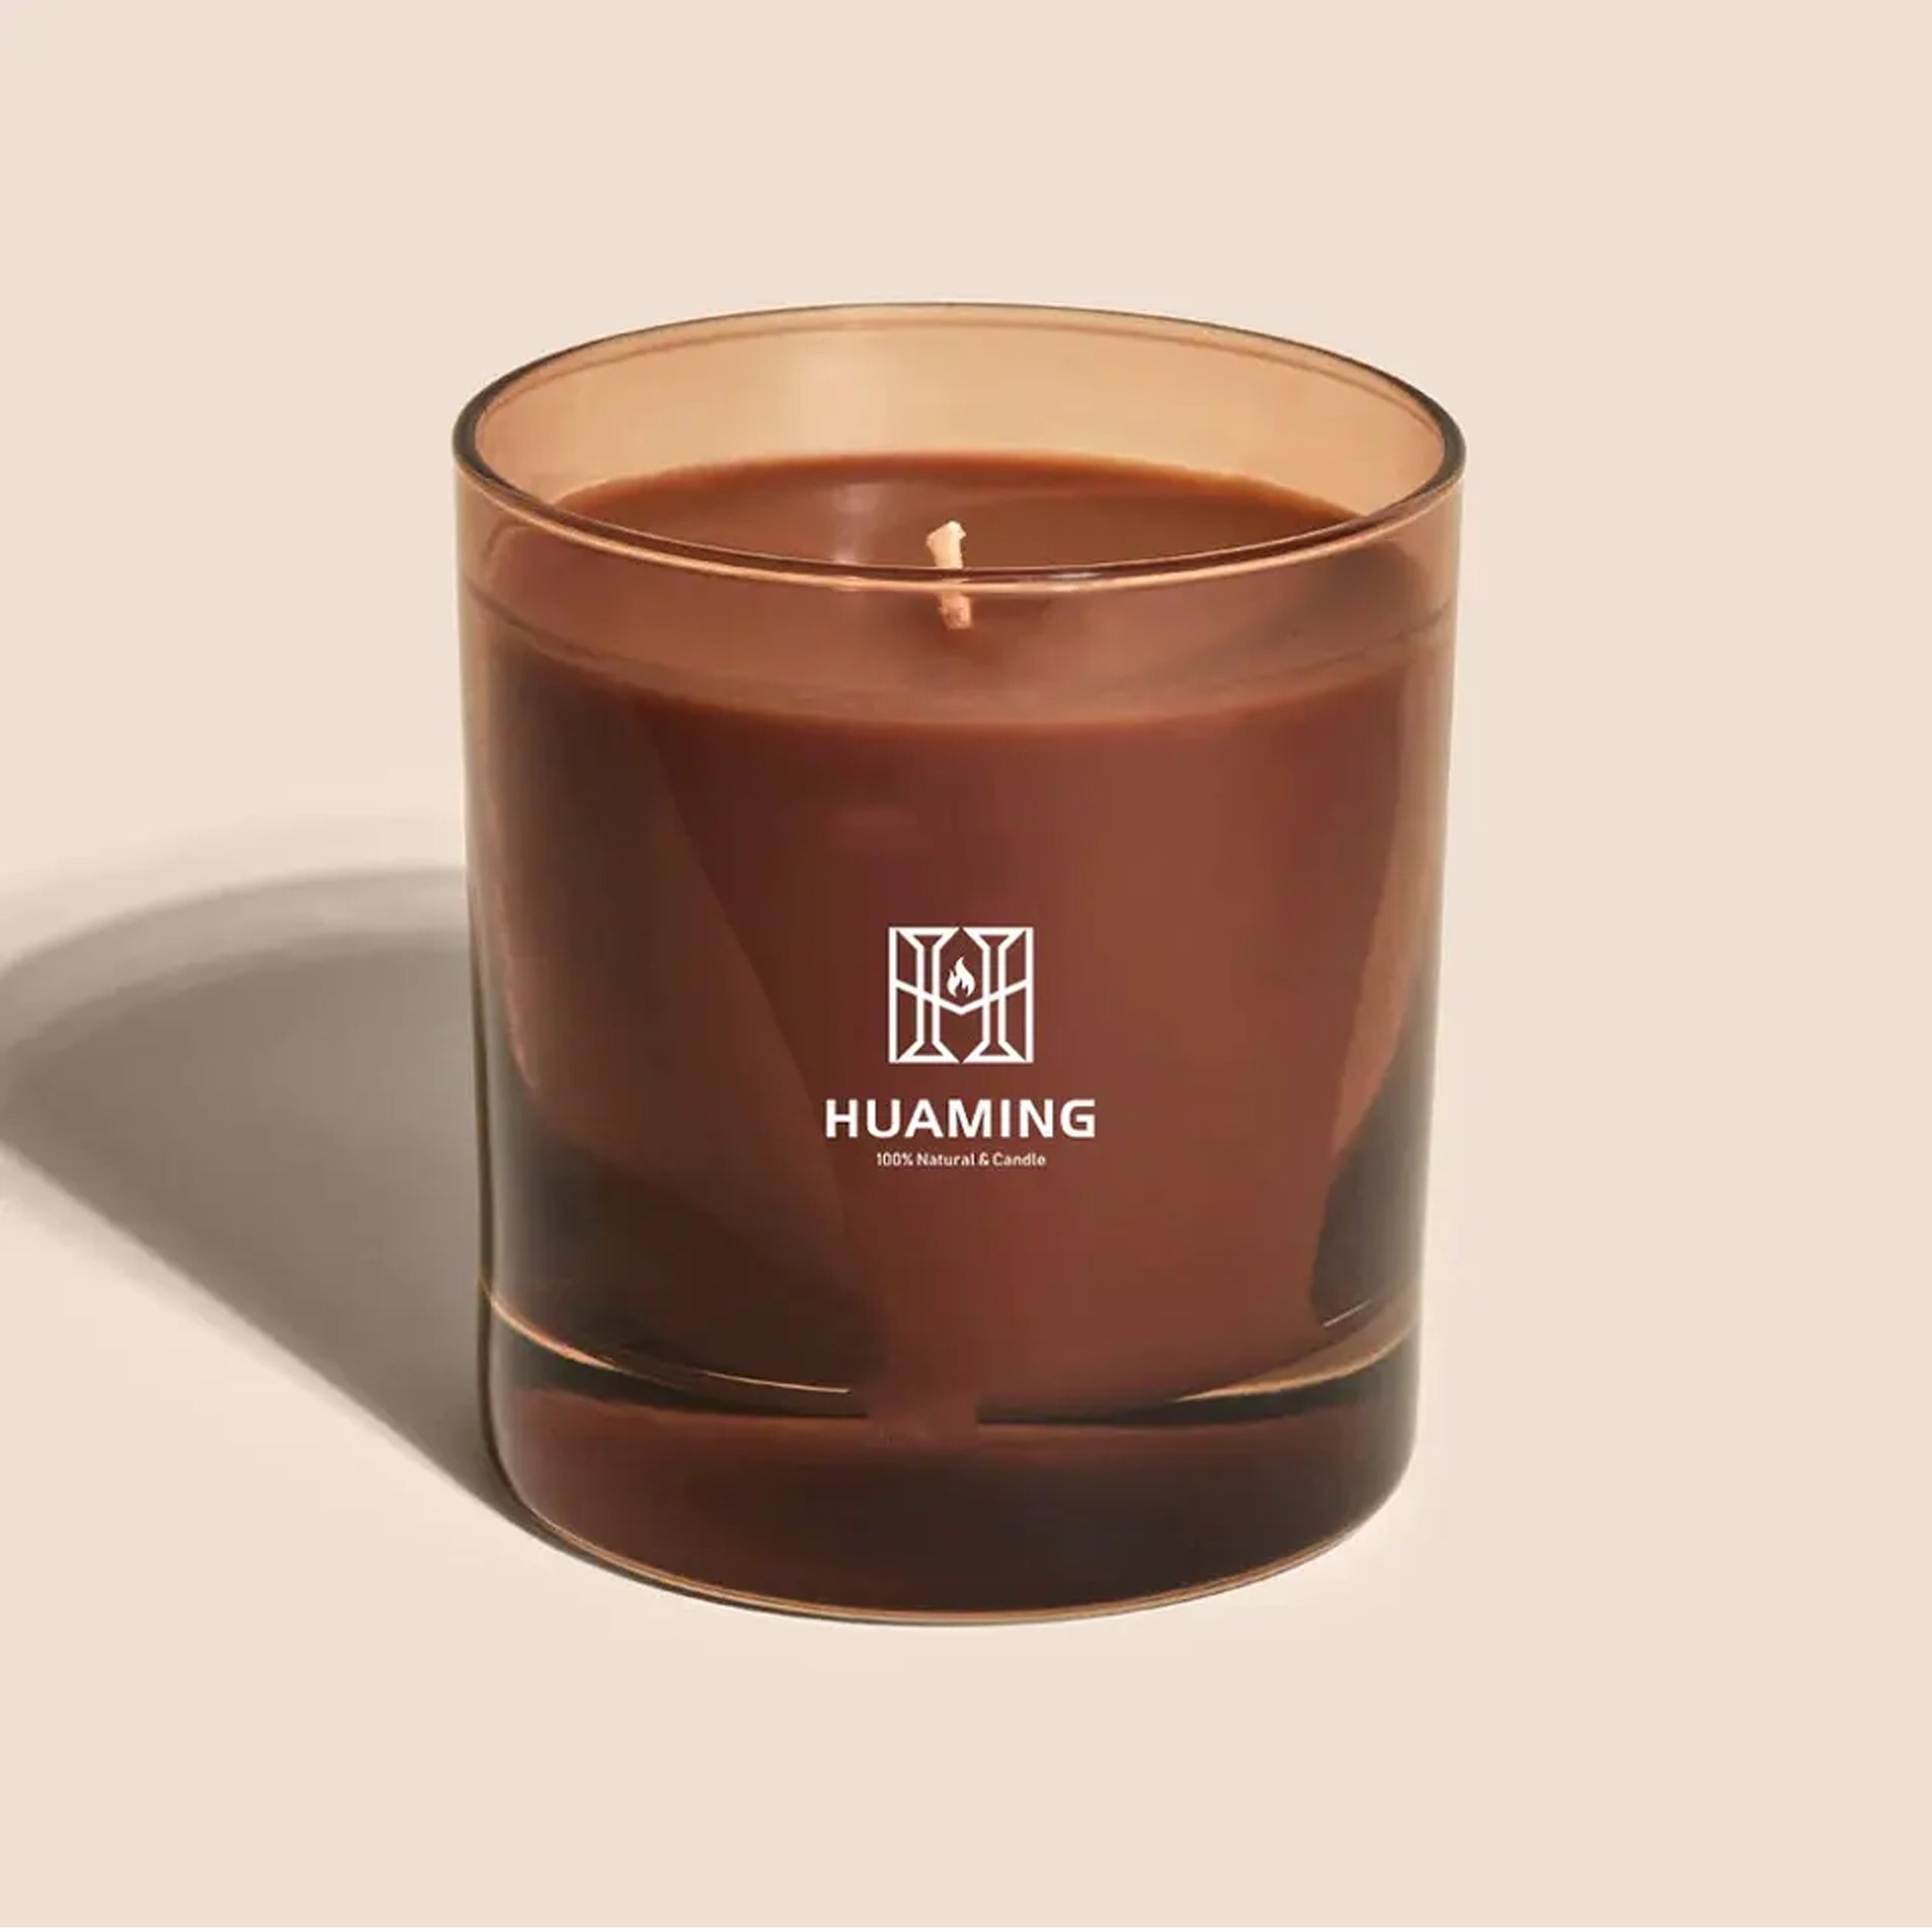 New Arrival Premium Soy Wax Creative Handmade Latte Coffee Scented Fragrance Candle